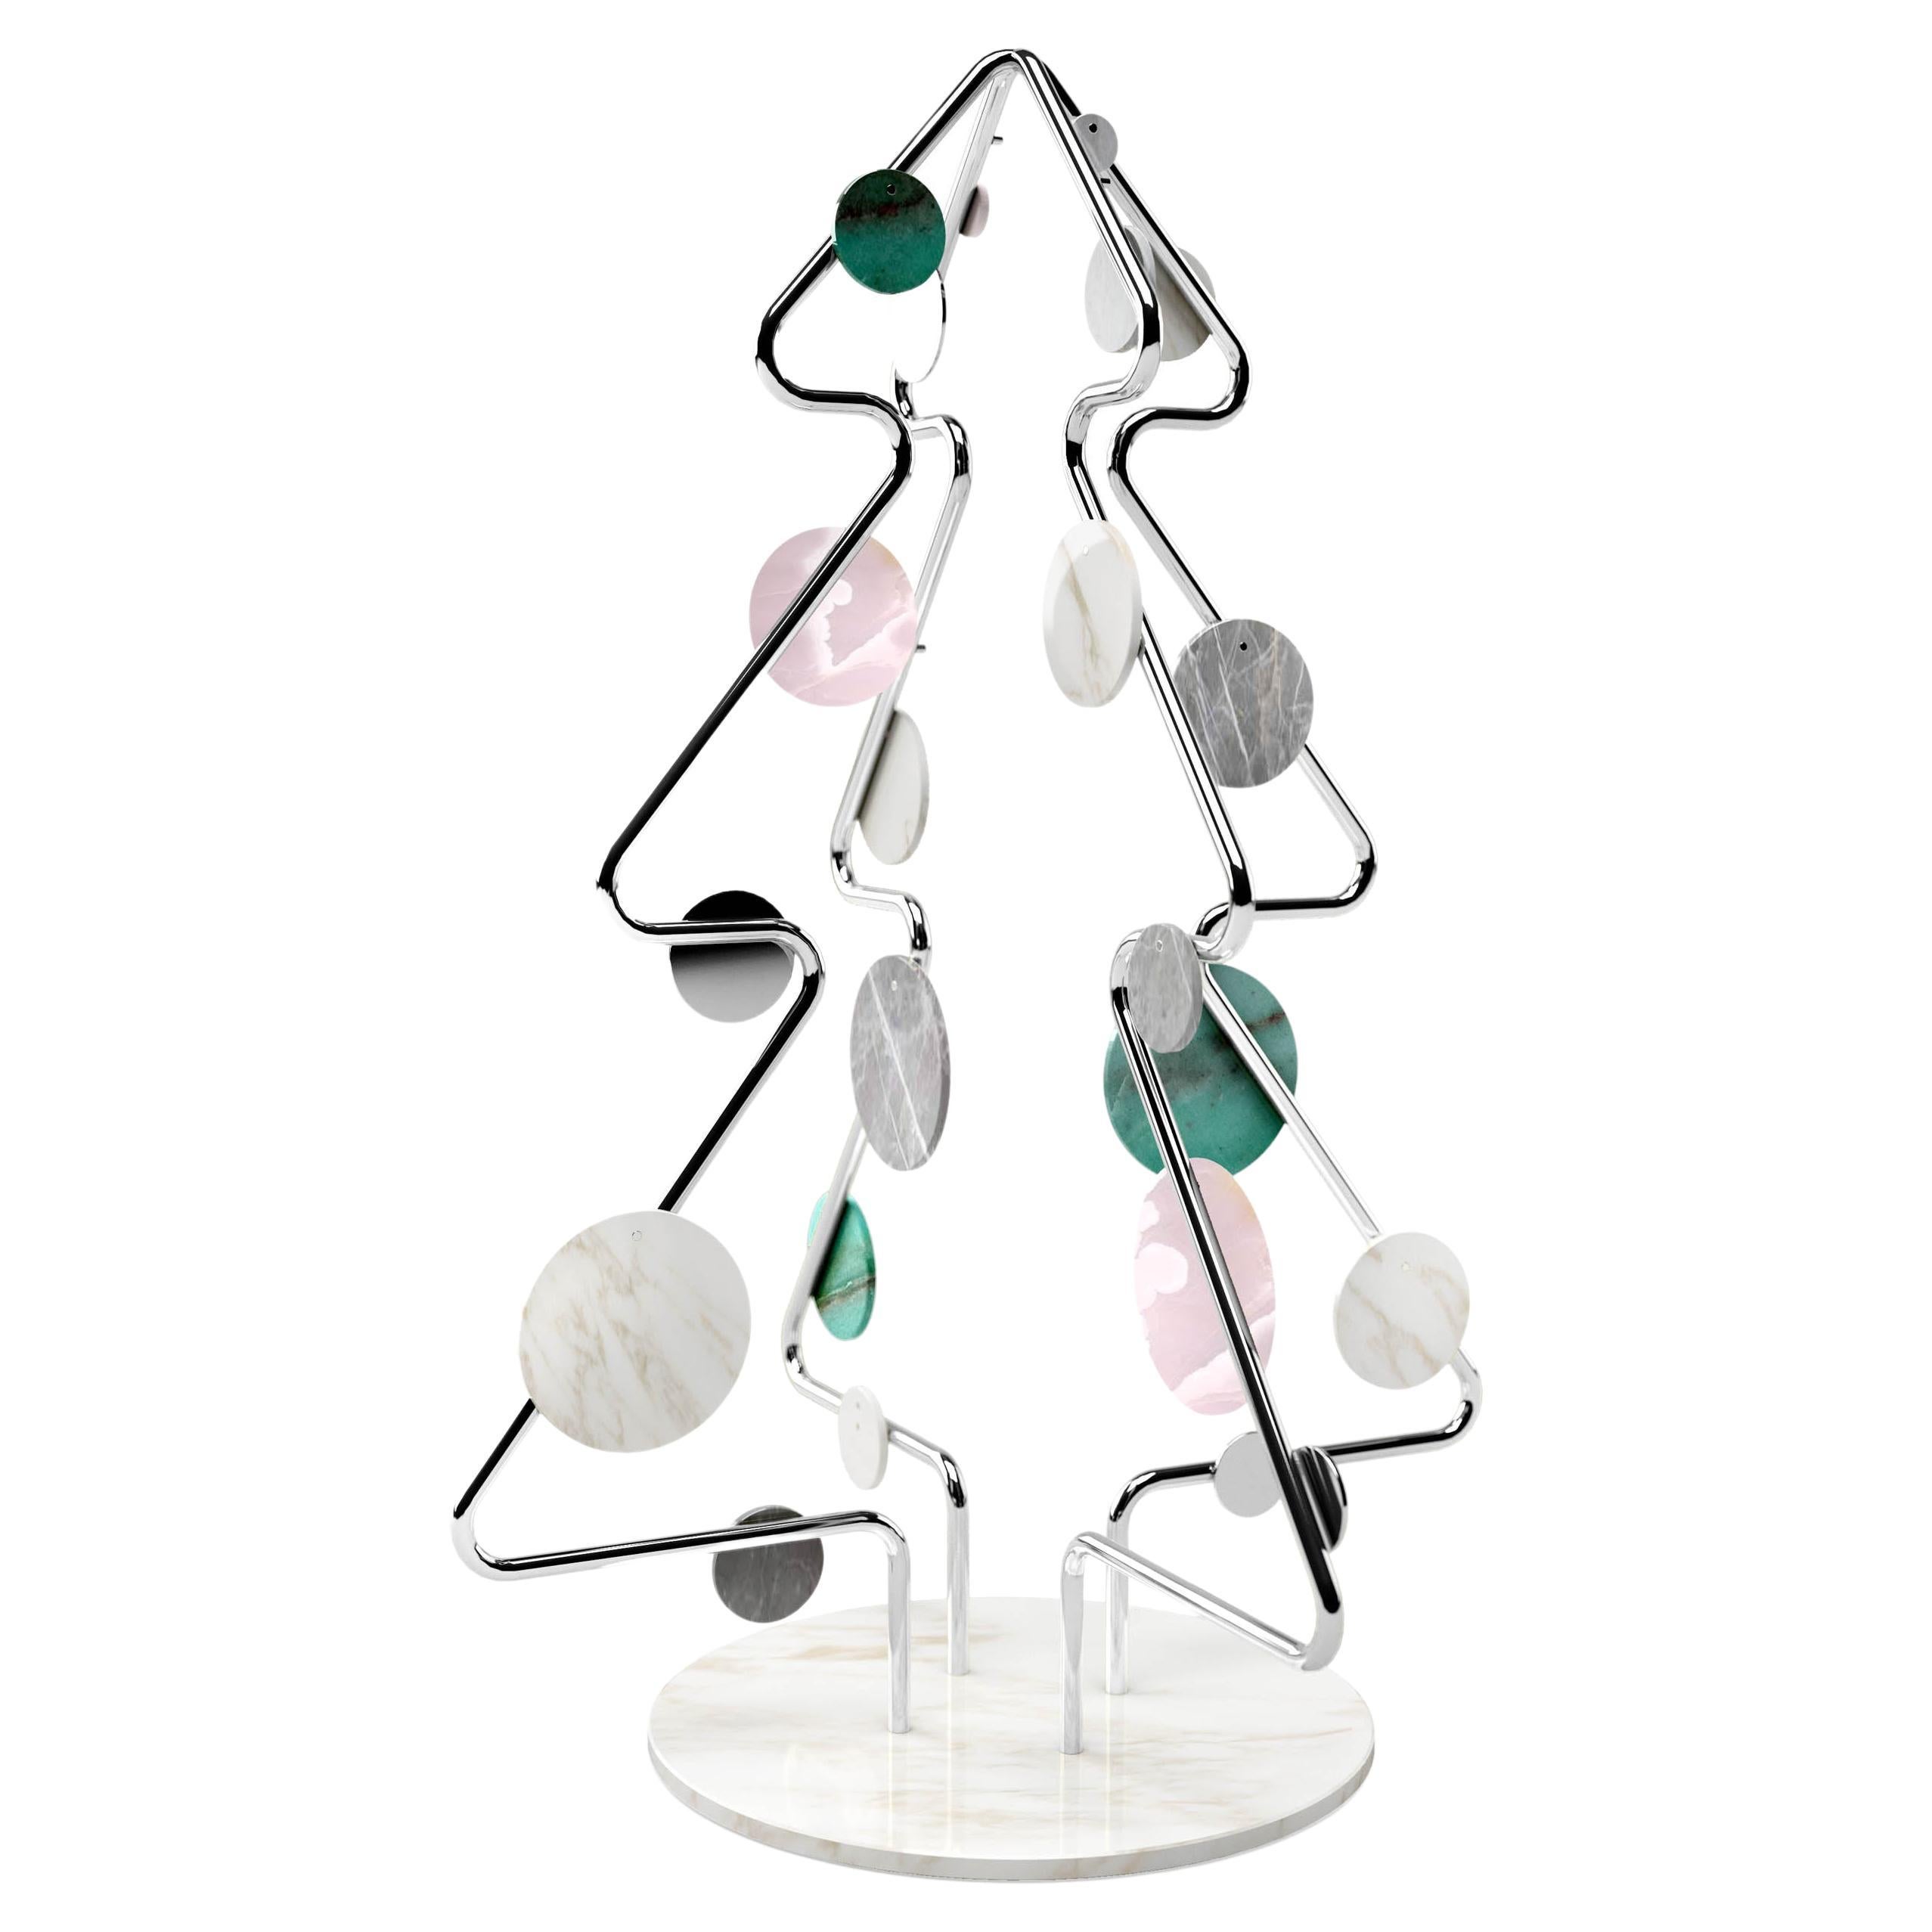 Christmas Tree Decorative Sculpture Marble Onyx Steel Collectible Design Italy